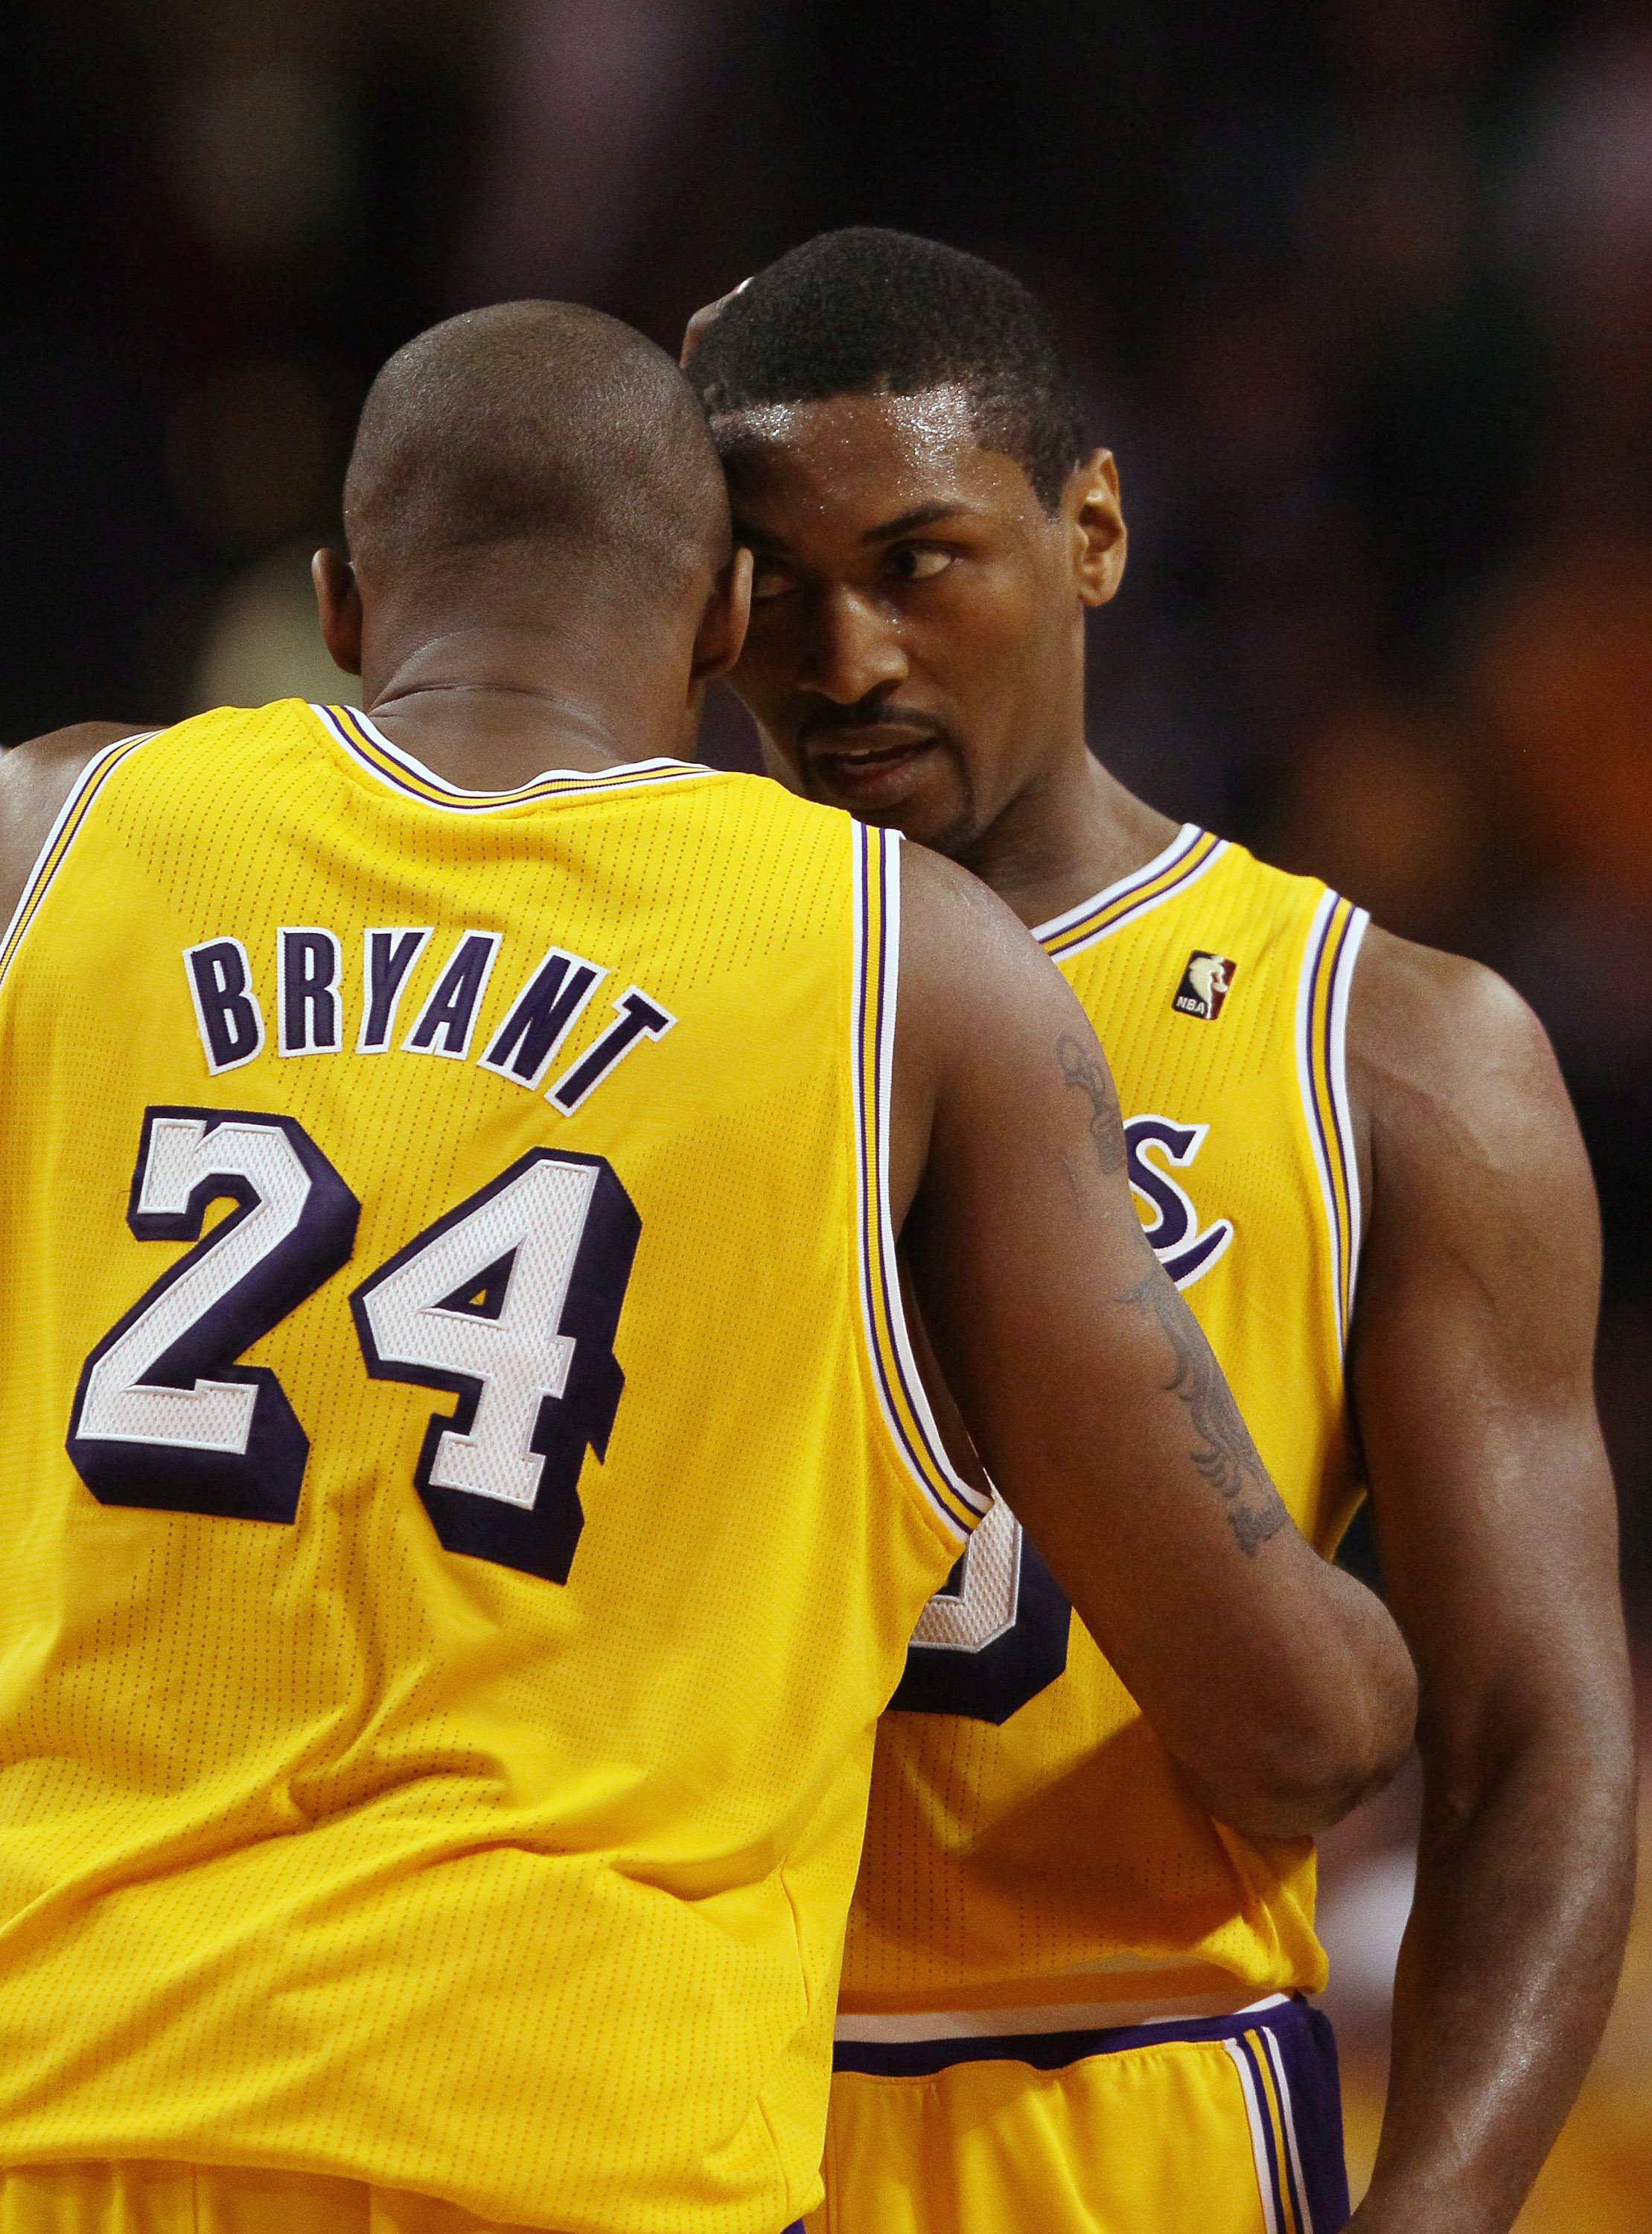 BOSTON, MA - FEBRUARY 10:  Ron Artest #15 and Kobe Bryant #24 of the Los Angeles Lakers talk during a stop in play in the second half against the Boston Celtics on February 10, 2011 at the TD Garden in Boston, Massachusetts.  The Lakers defeated the Celti